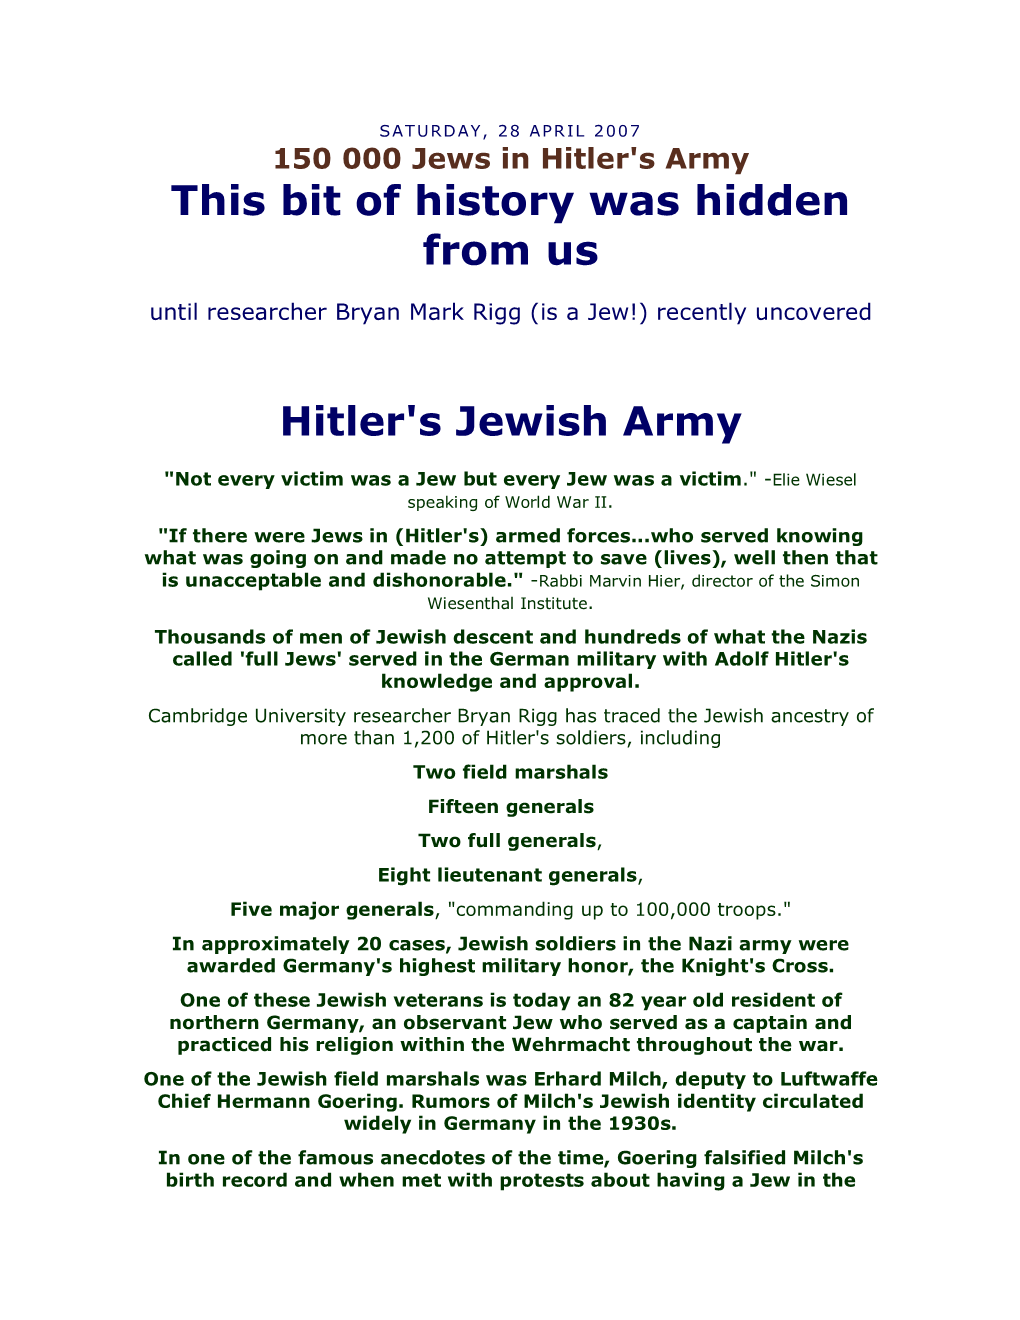 This Bit of History Was Hidden from Us Hitler's Jewish Army